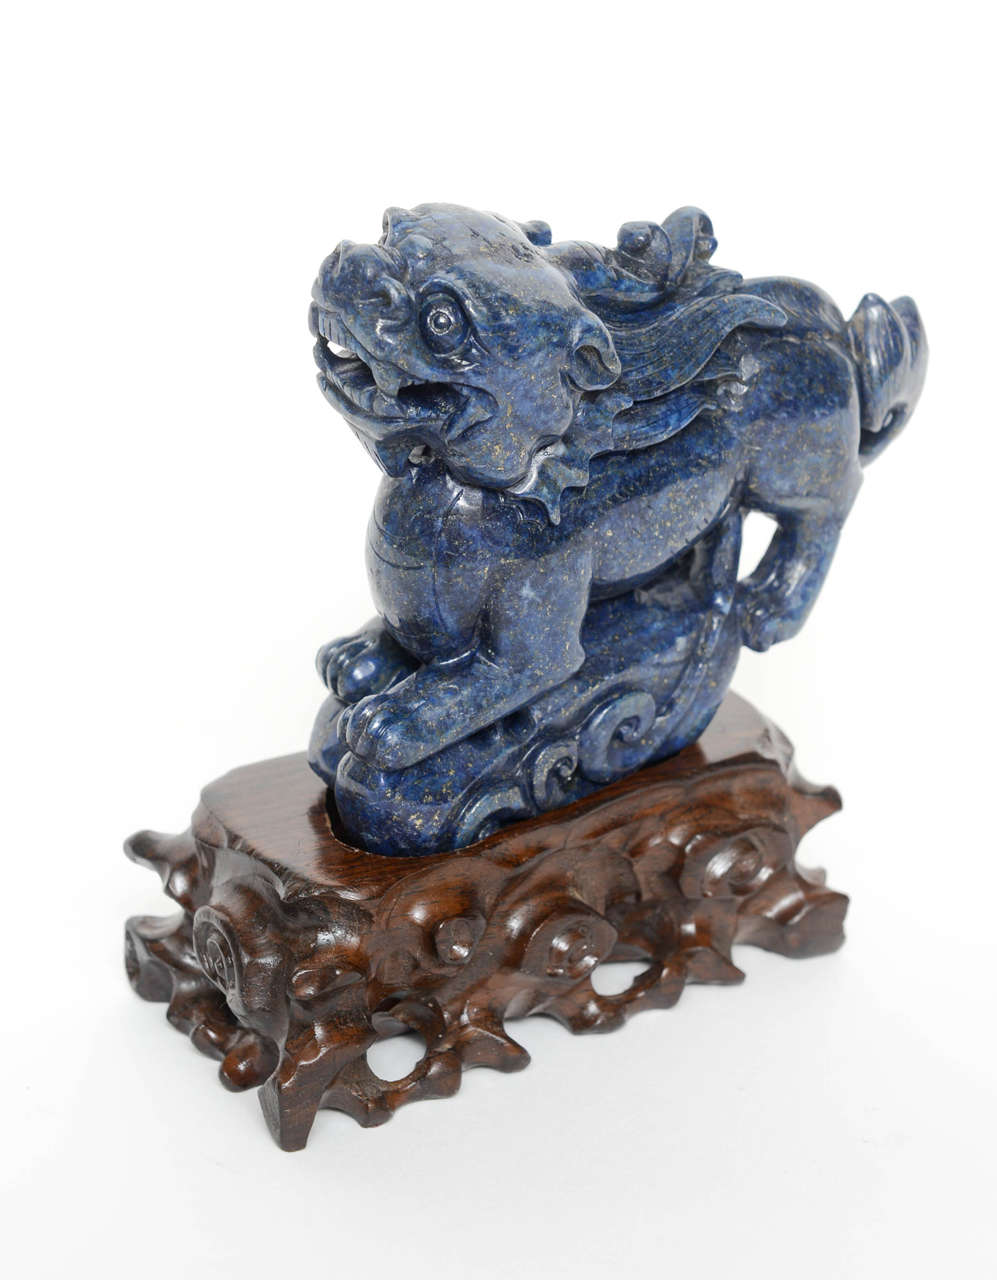 Beautifully carved lapis lazuli sculpture on a custom, hand carved base which is not attached.

Sculpture is 4.5